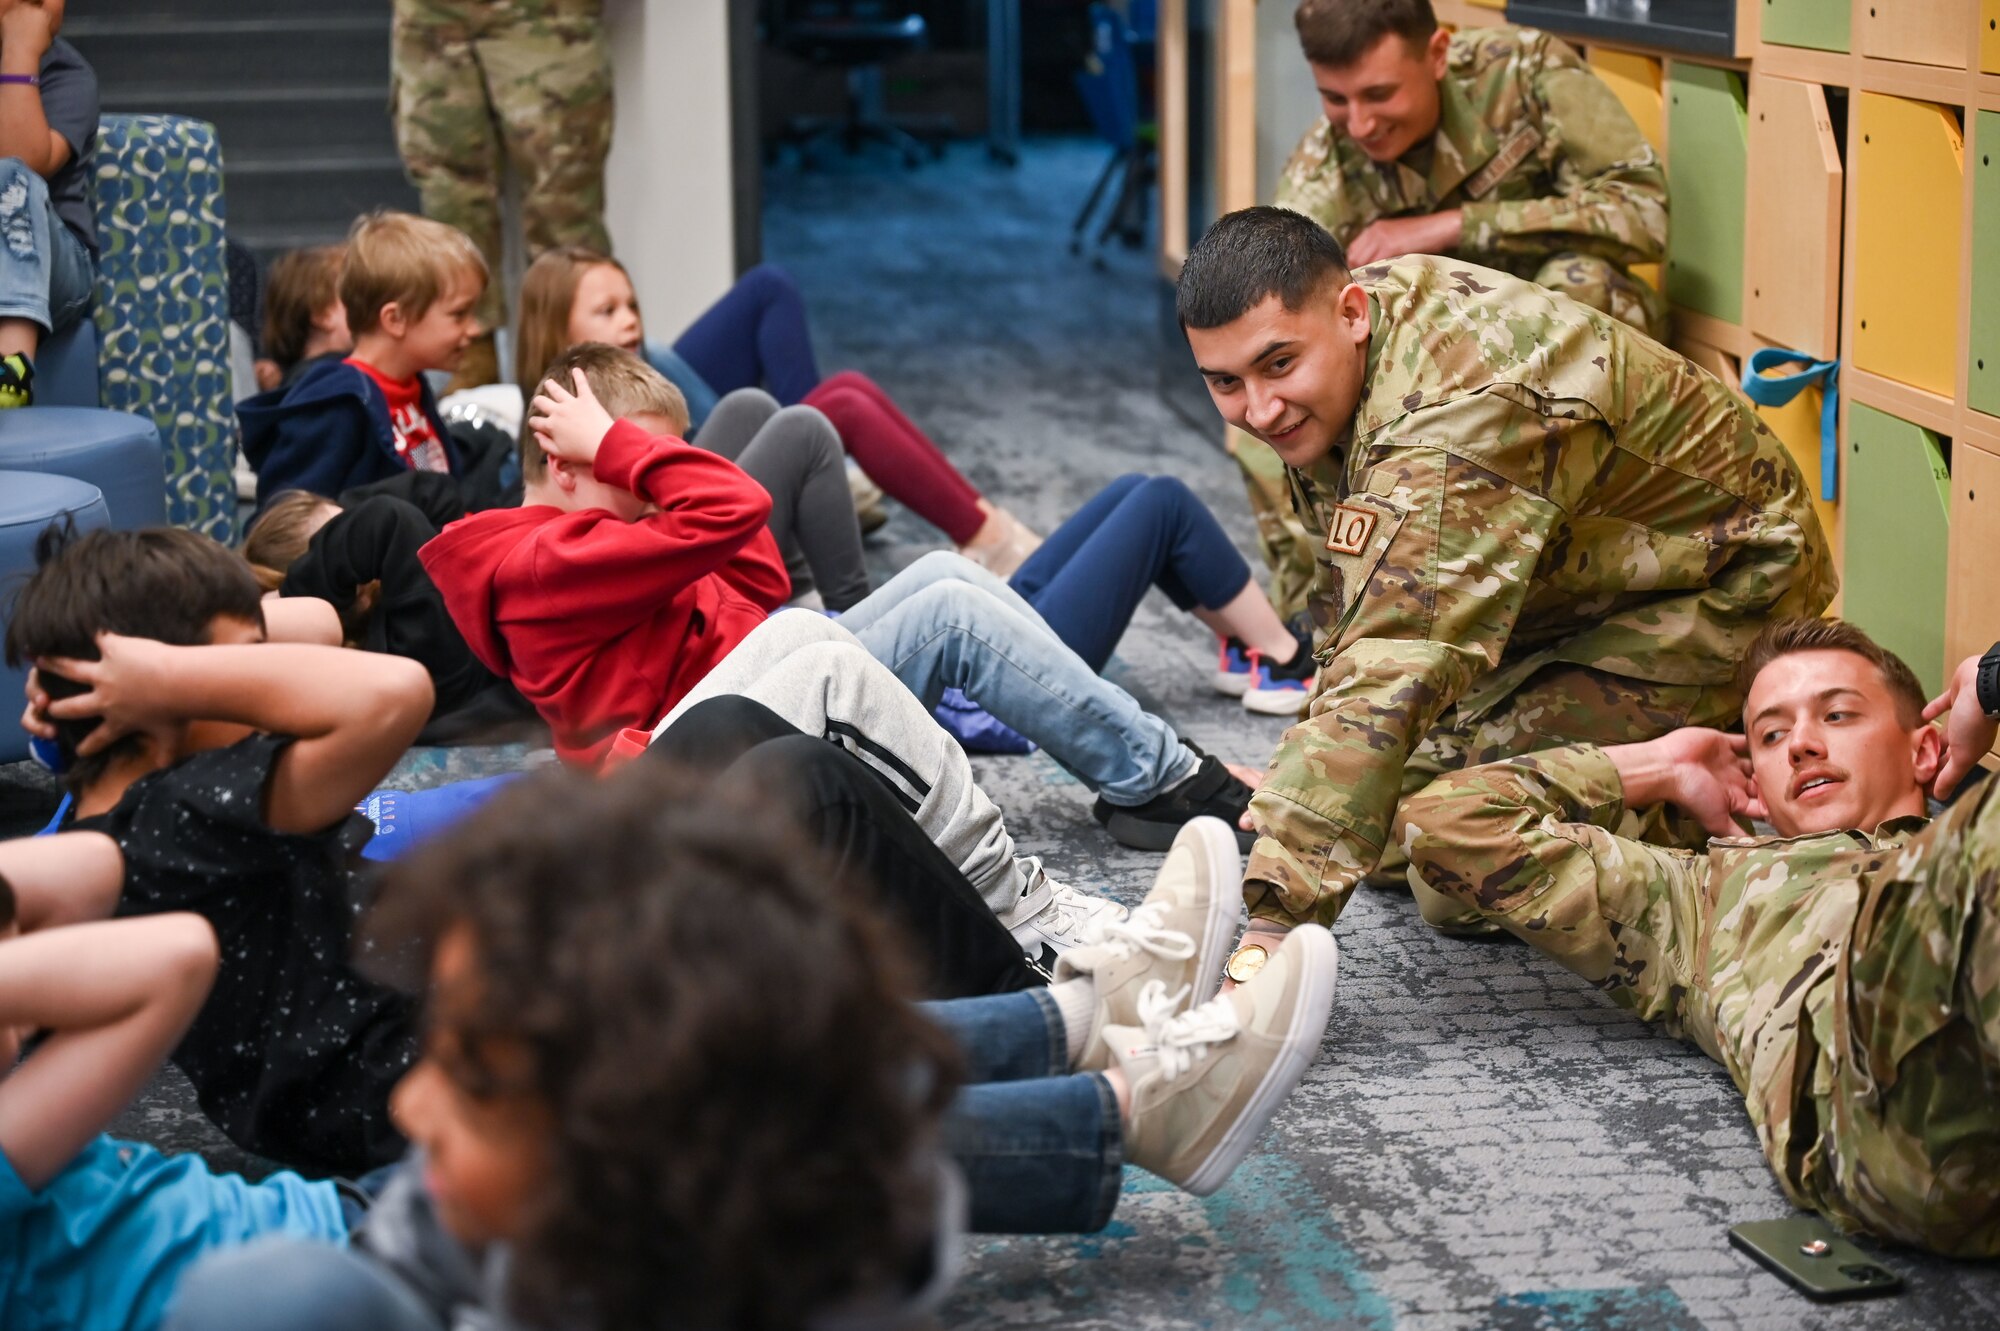 (Middle right) Senior Airman Dominic Alire, 419th Maintenance Squadron, helps South Clearfield Elementary students with sit-ups April 18, 2023, in Clearfield, Utah. The Airmen visited the school to engage with the community during the Month of the Military Child. (U.S. Air Force photo by Cynthia Griggs)